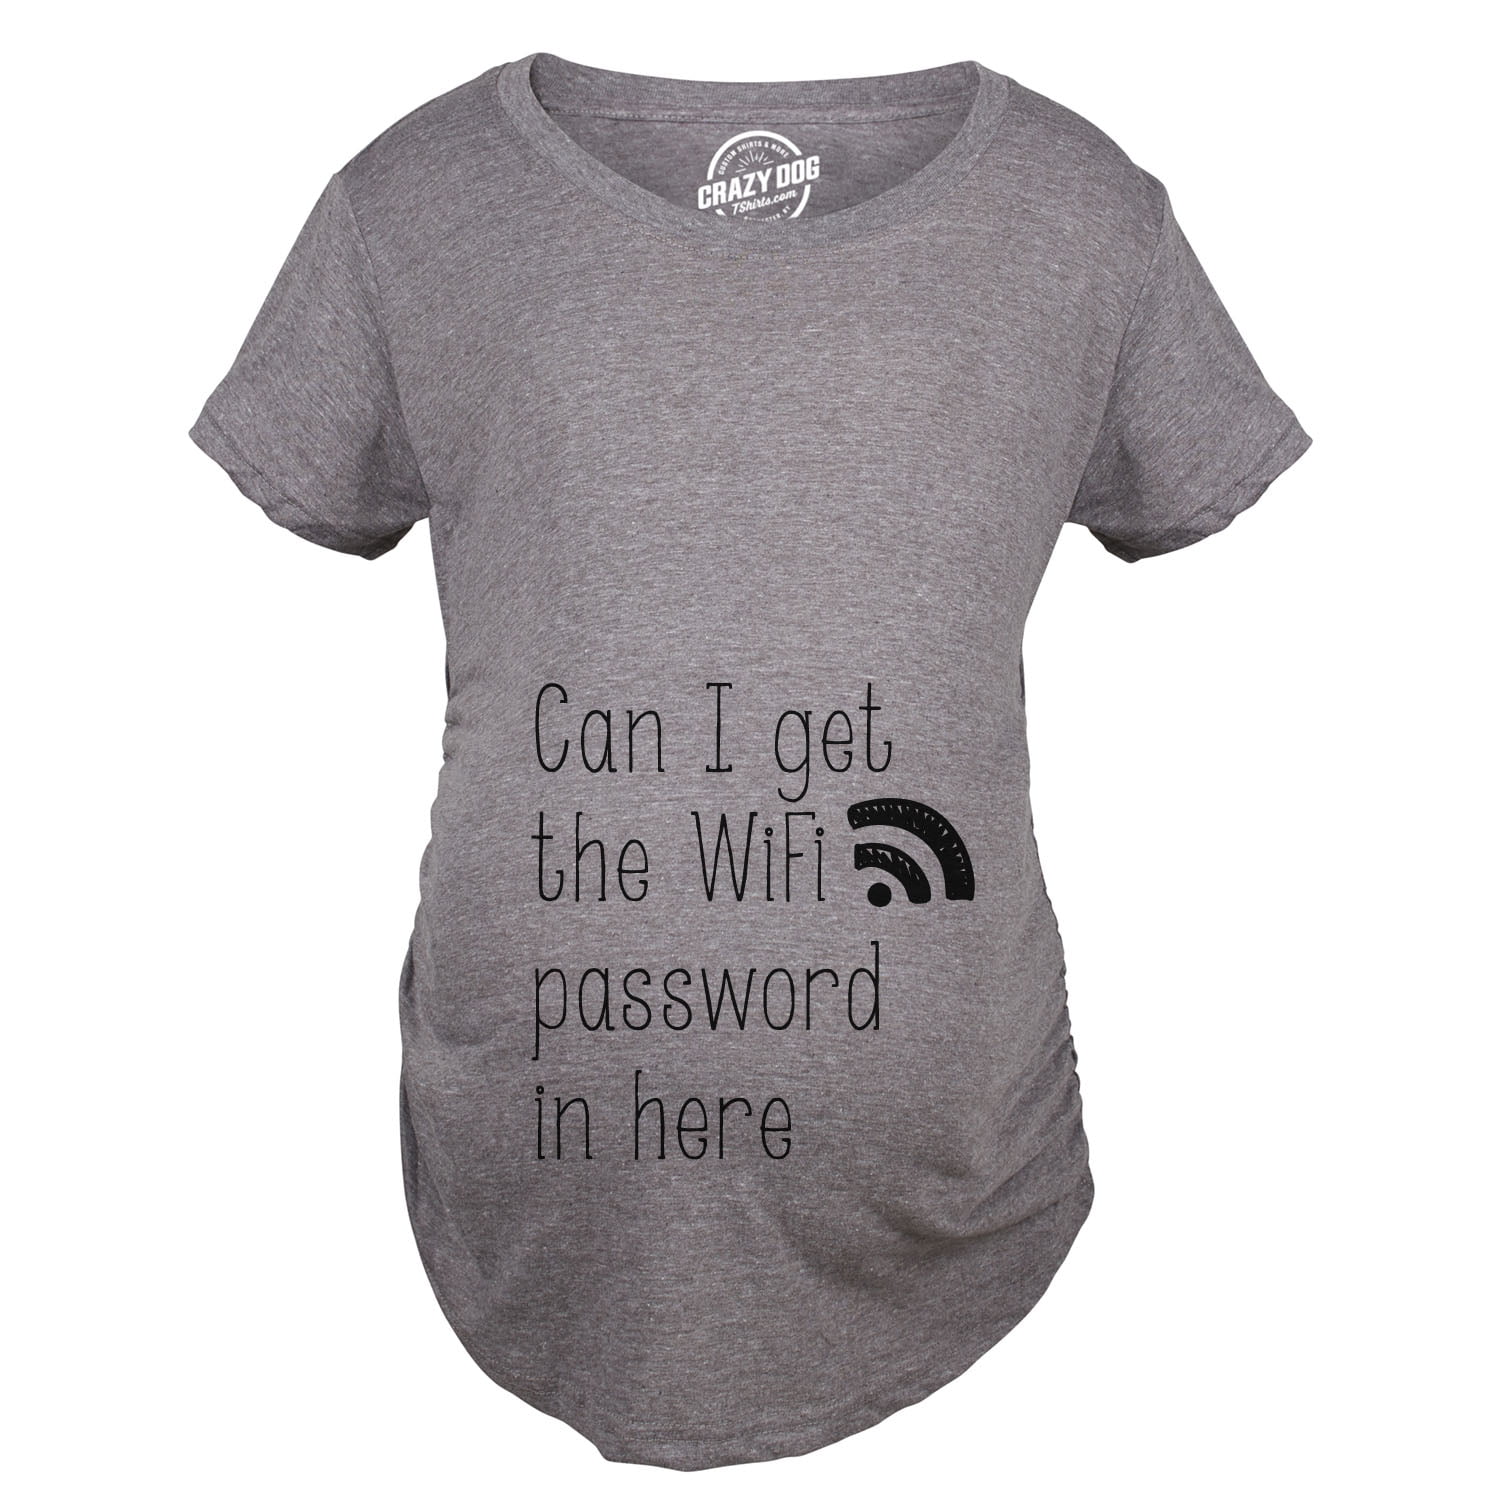 Cotton Maternity T-Shirt CafePress Cute & Funny Pregnancy Tee Planning My Escape in July!